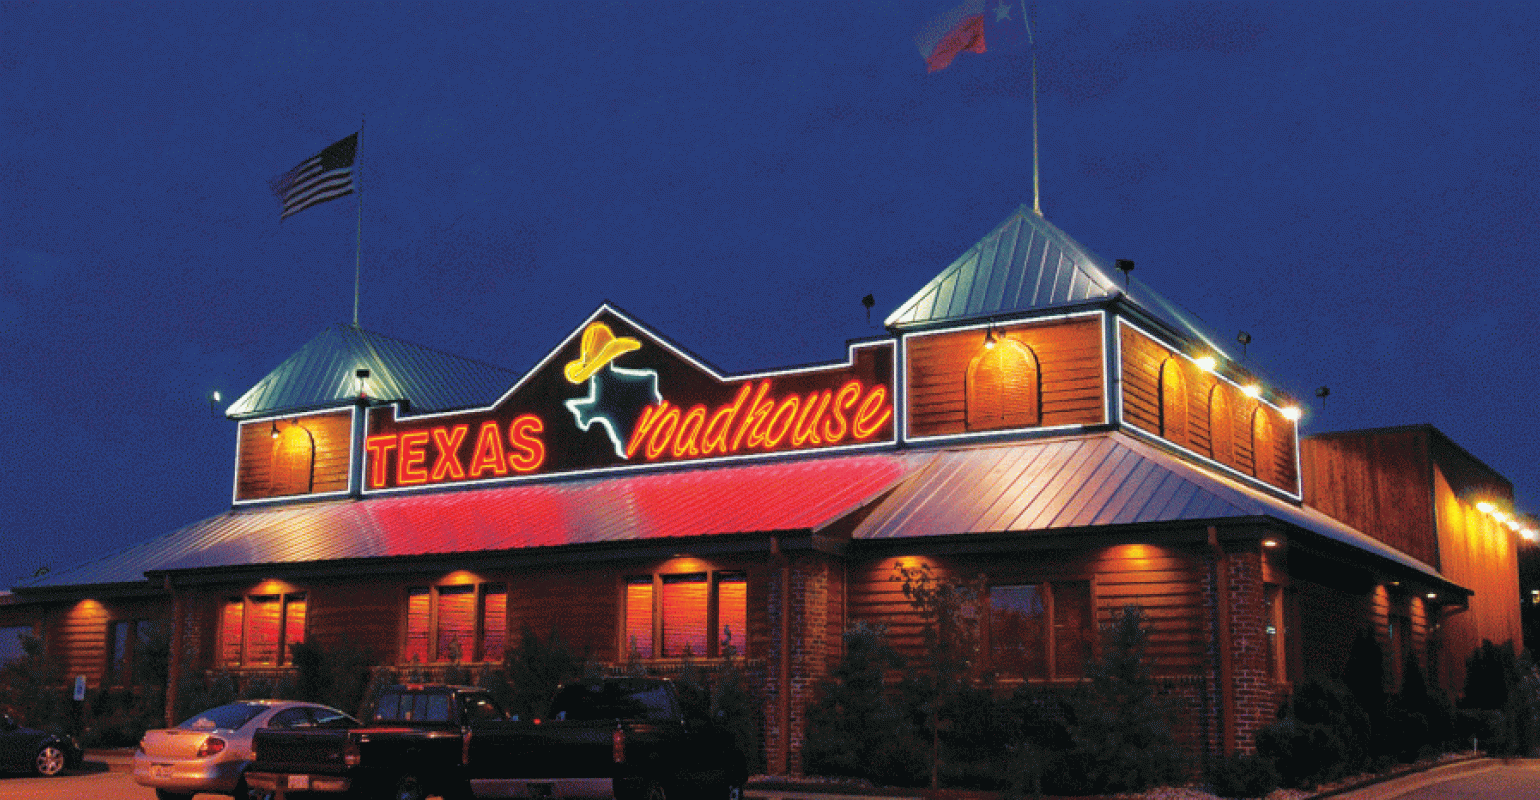 How Texas Roadhouse is improving its off-premises business